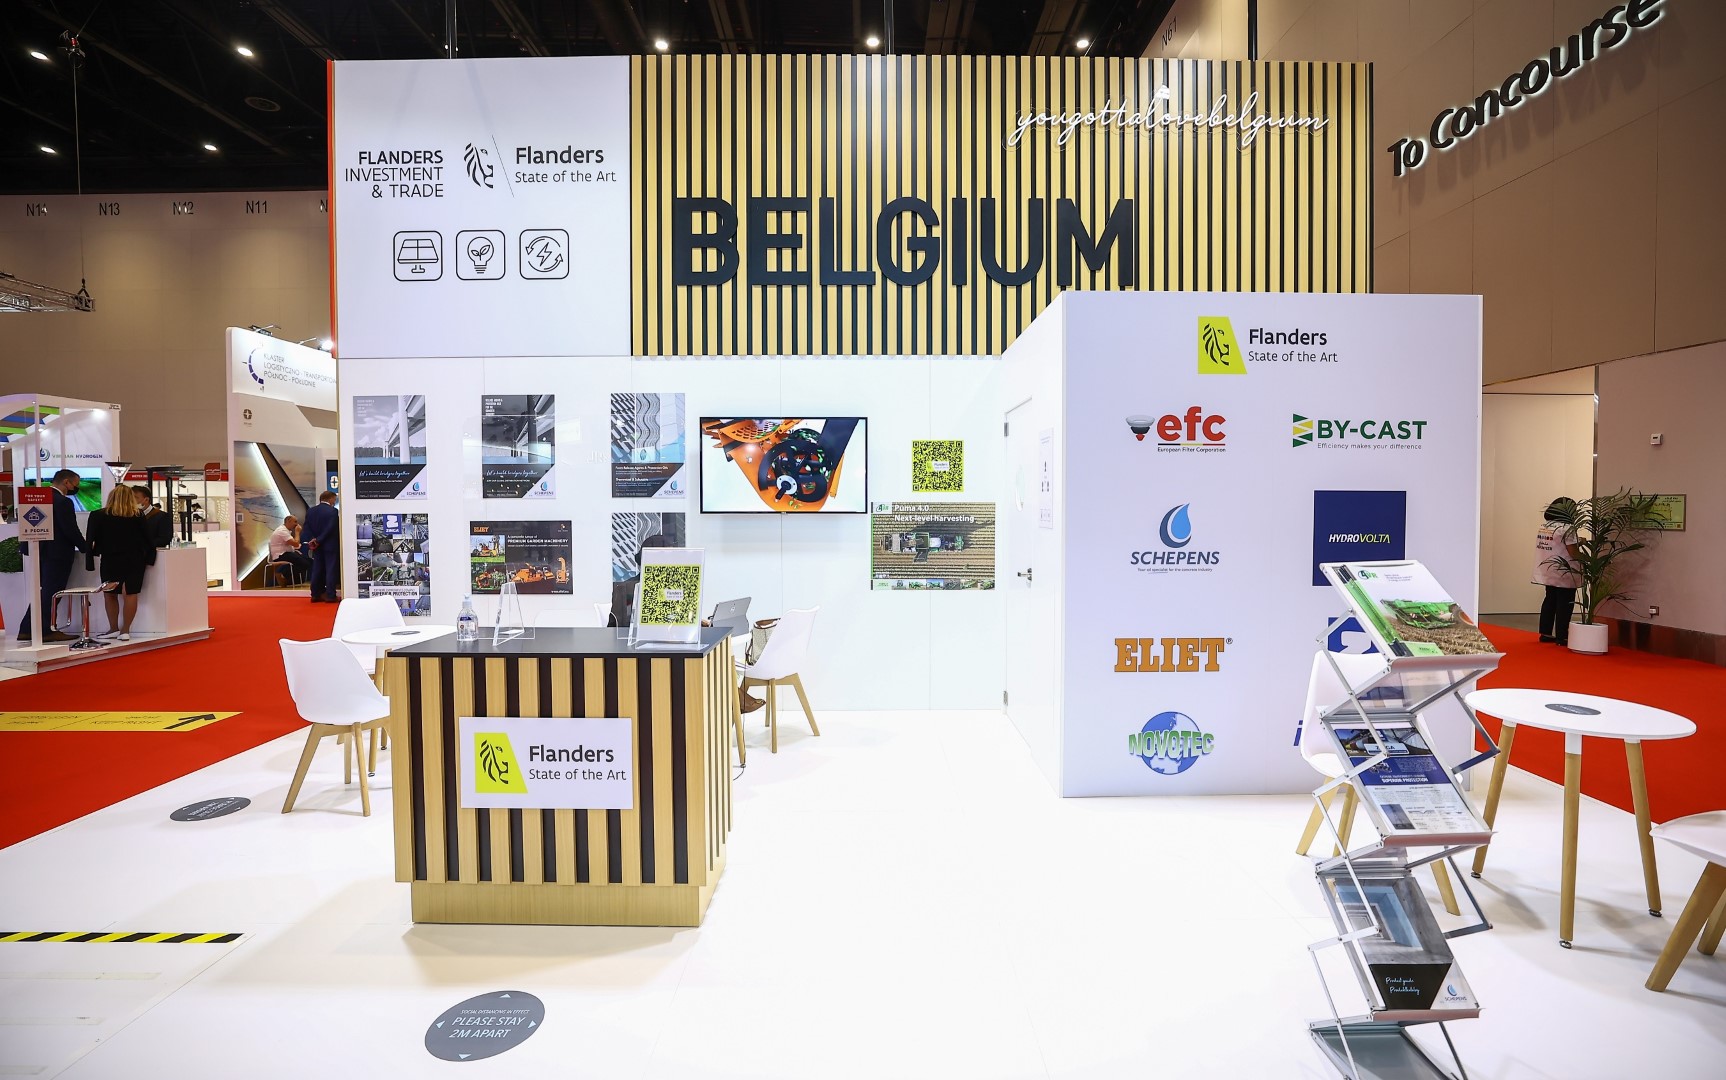 Belgian companies display latest technologies in energy, water at WETEX and Dubai Solar Show 2022 – EQ Mag Pro